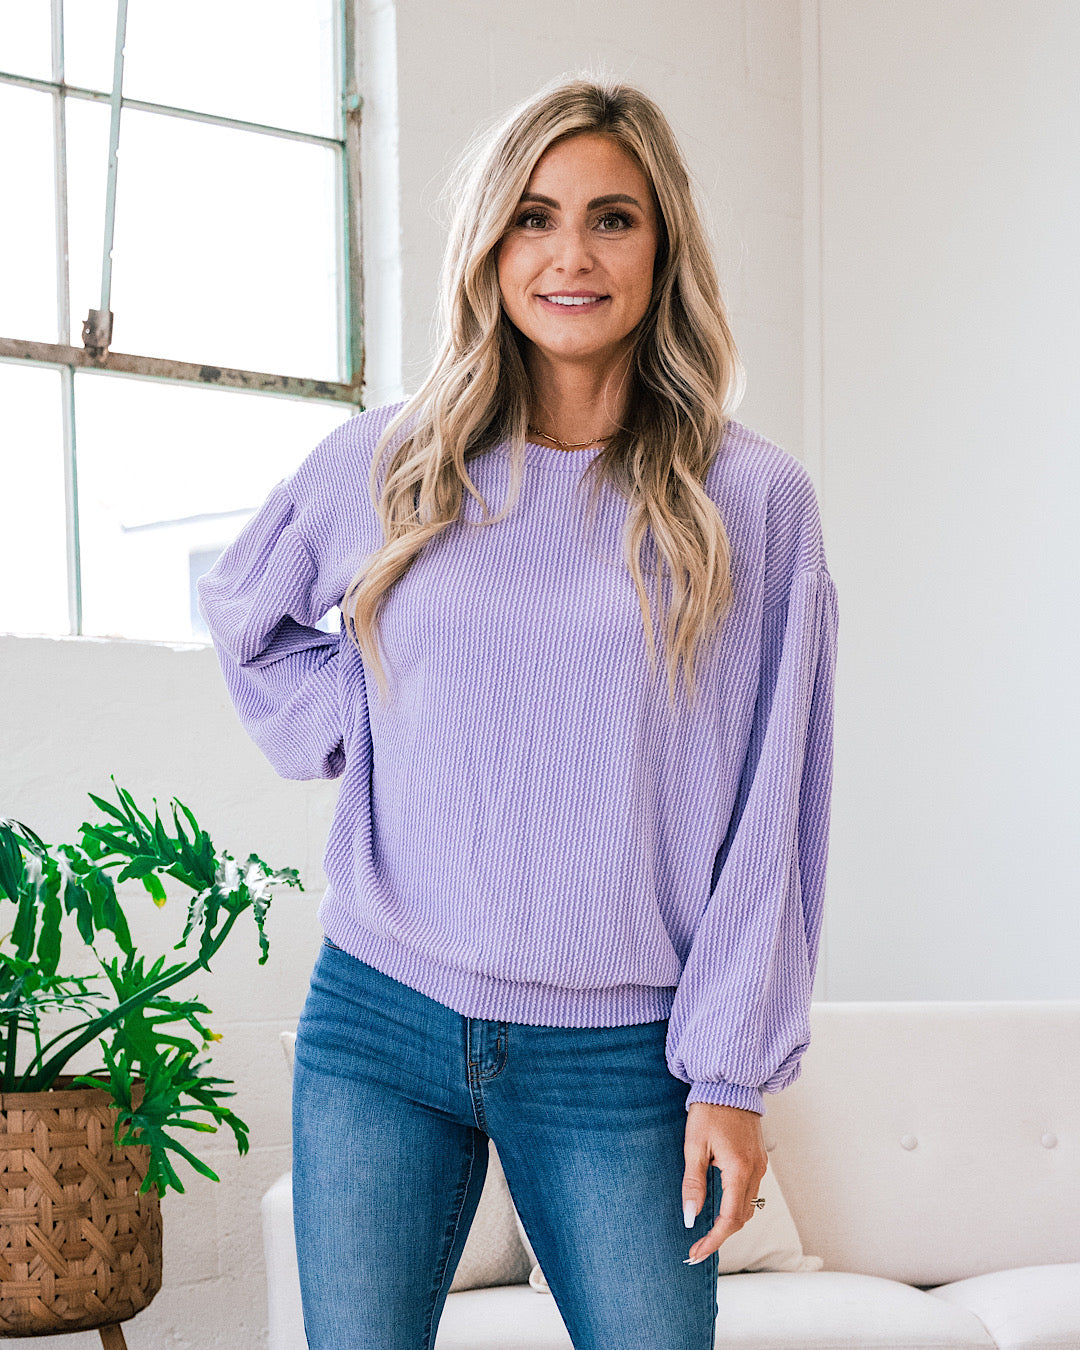 Aleisha Corded Banded Bottom Top - Lavender  Lovely Melody   